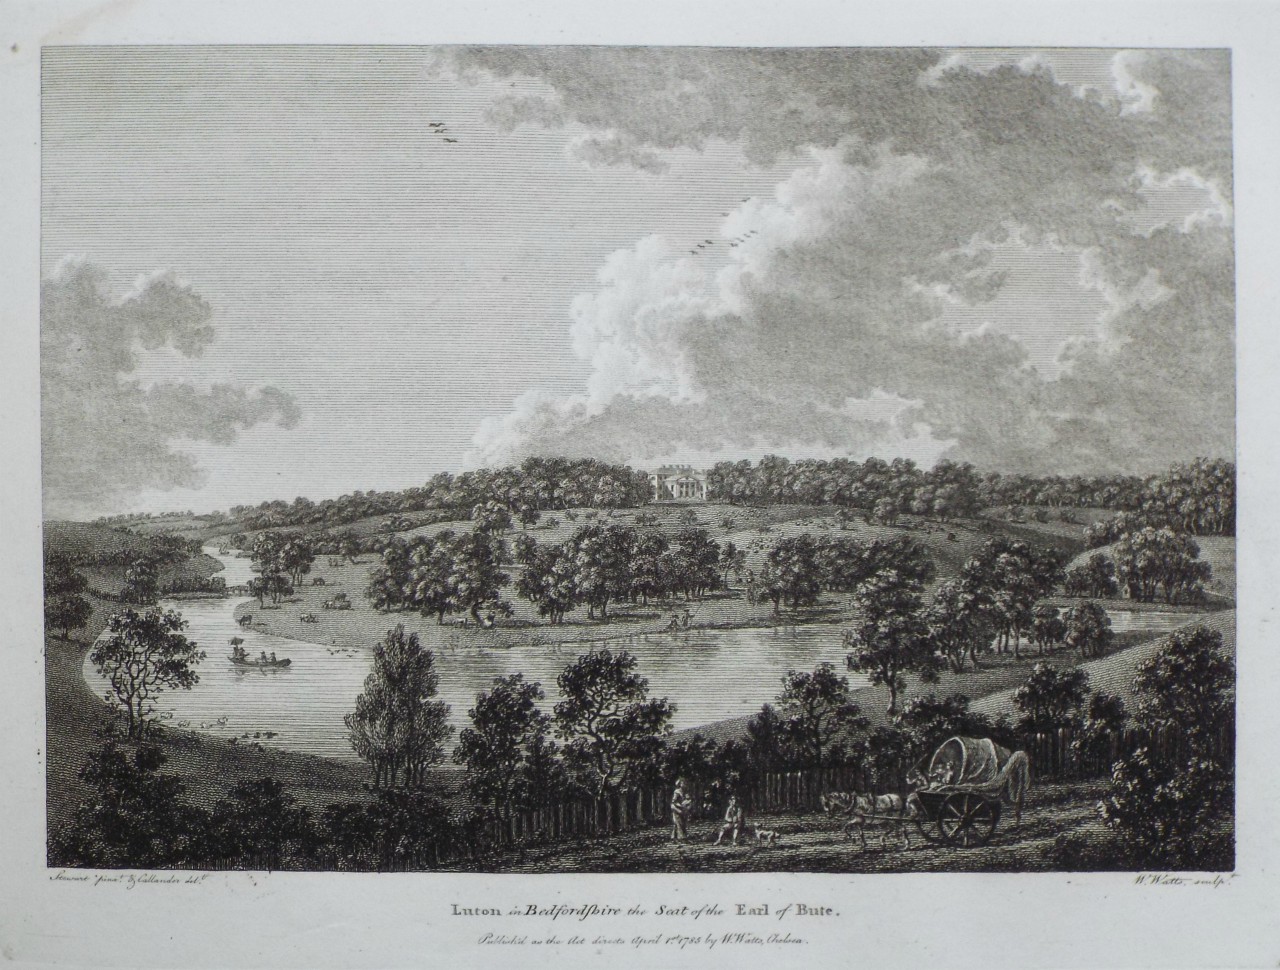 Print - Luton in Bedfordshire the Seat of the Earl of Bute. - Watts